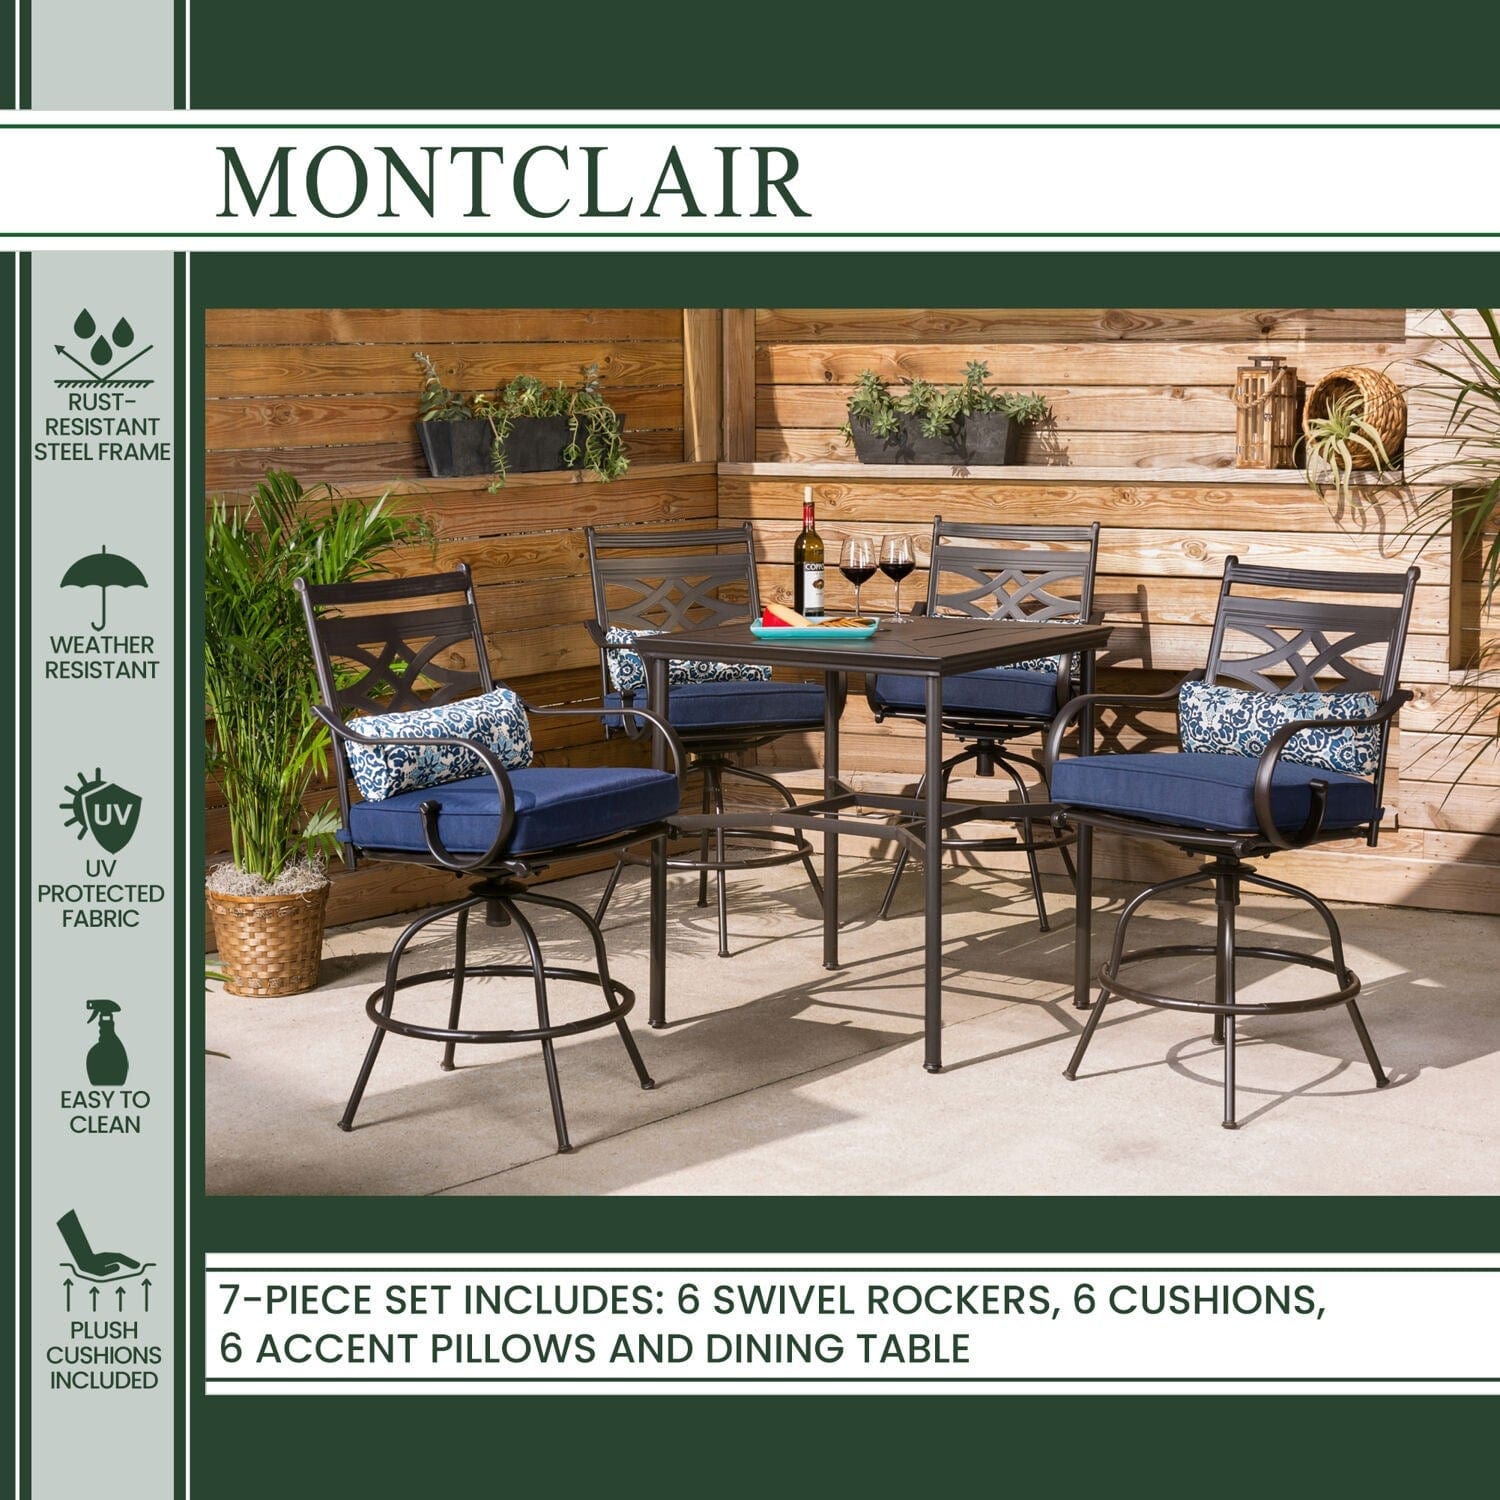 Hanover Outdoor Dining Set Hanover - Montclair 7-Piece Dining Set in Navy Blue with 6 Swivel Rockers and a 40" x 67" Dining Table | MCLRDN7PCSQSW6-NVY